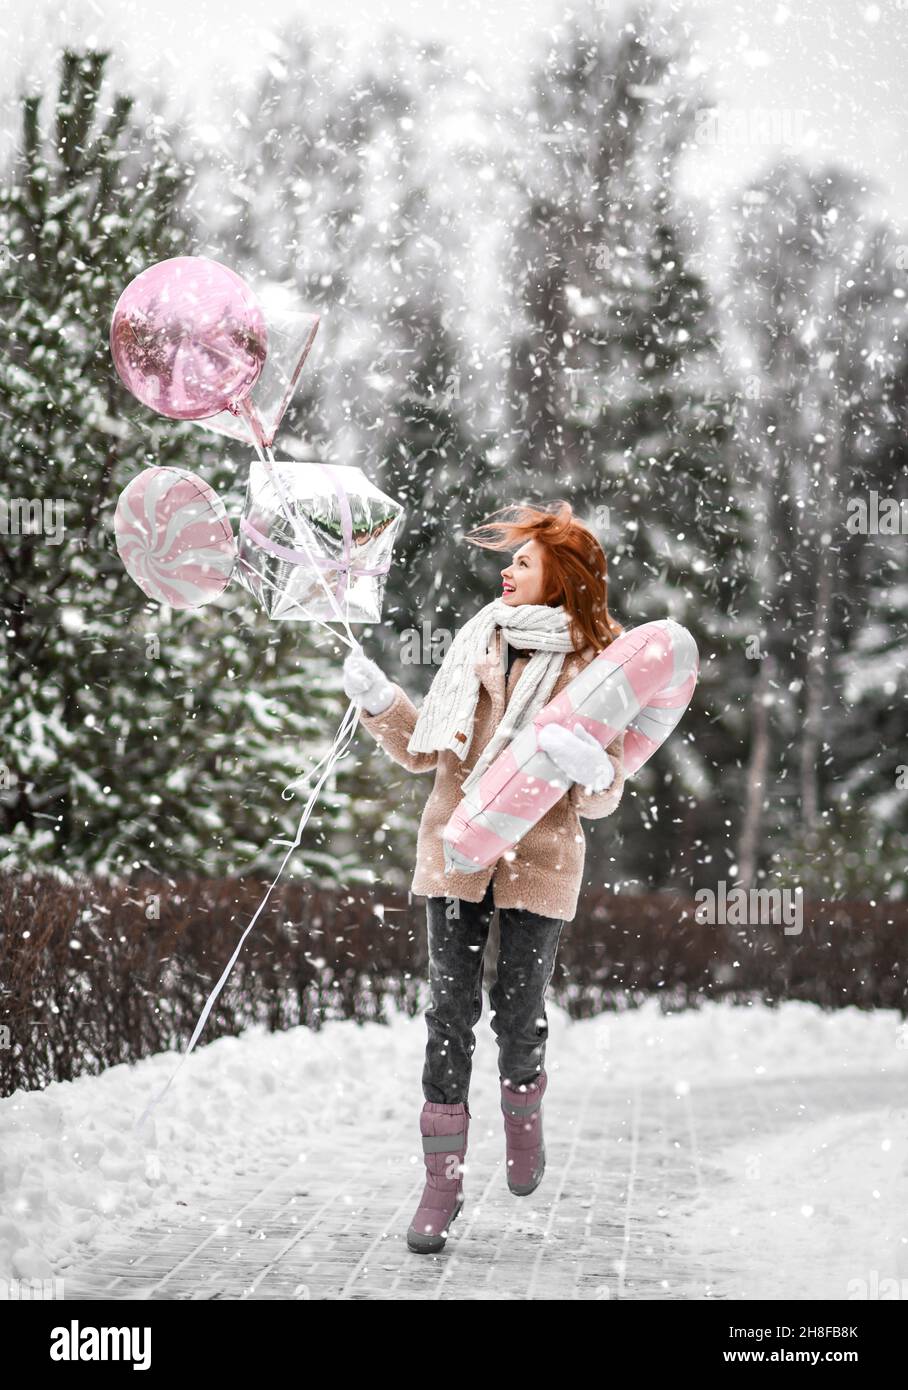 Young happt pretty woman in stylish fur coat and mittens walking with toy magic wand and glitter balloons in hands in winter park Stock Photo